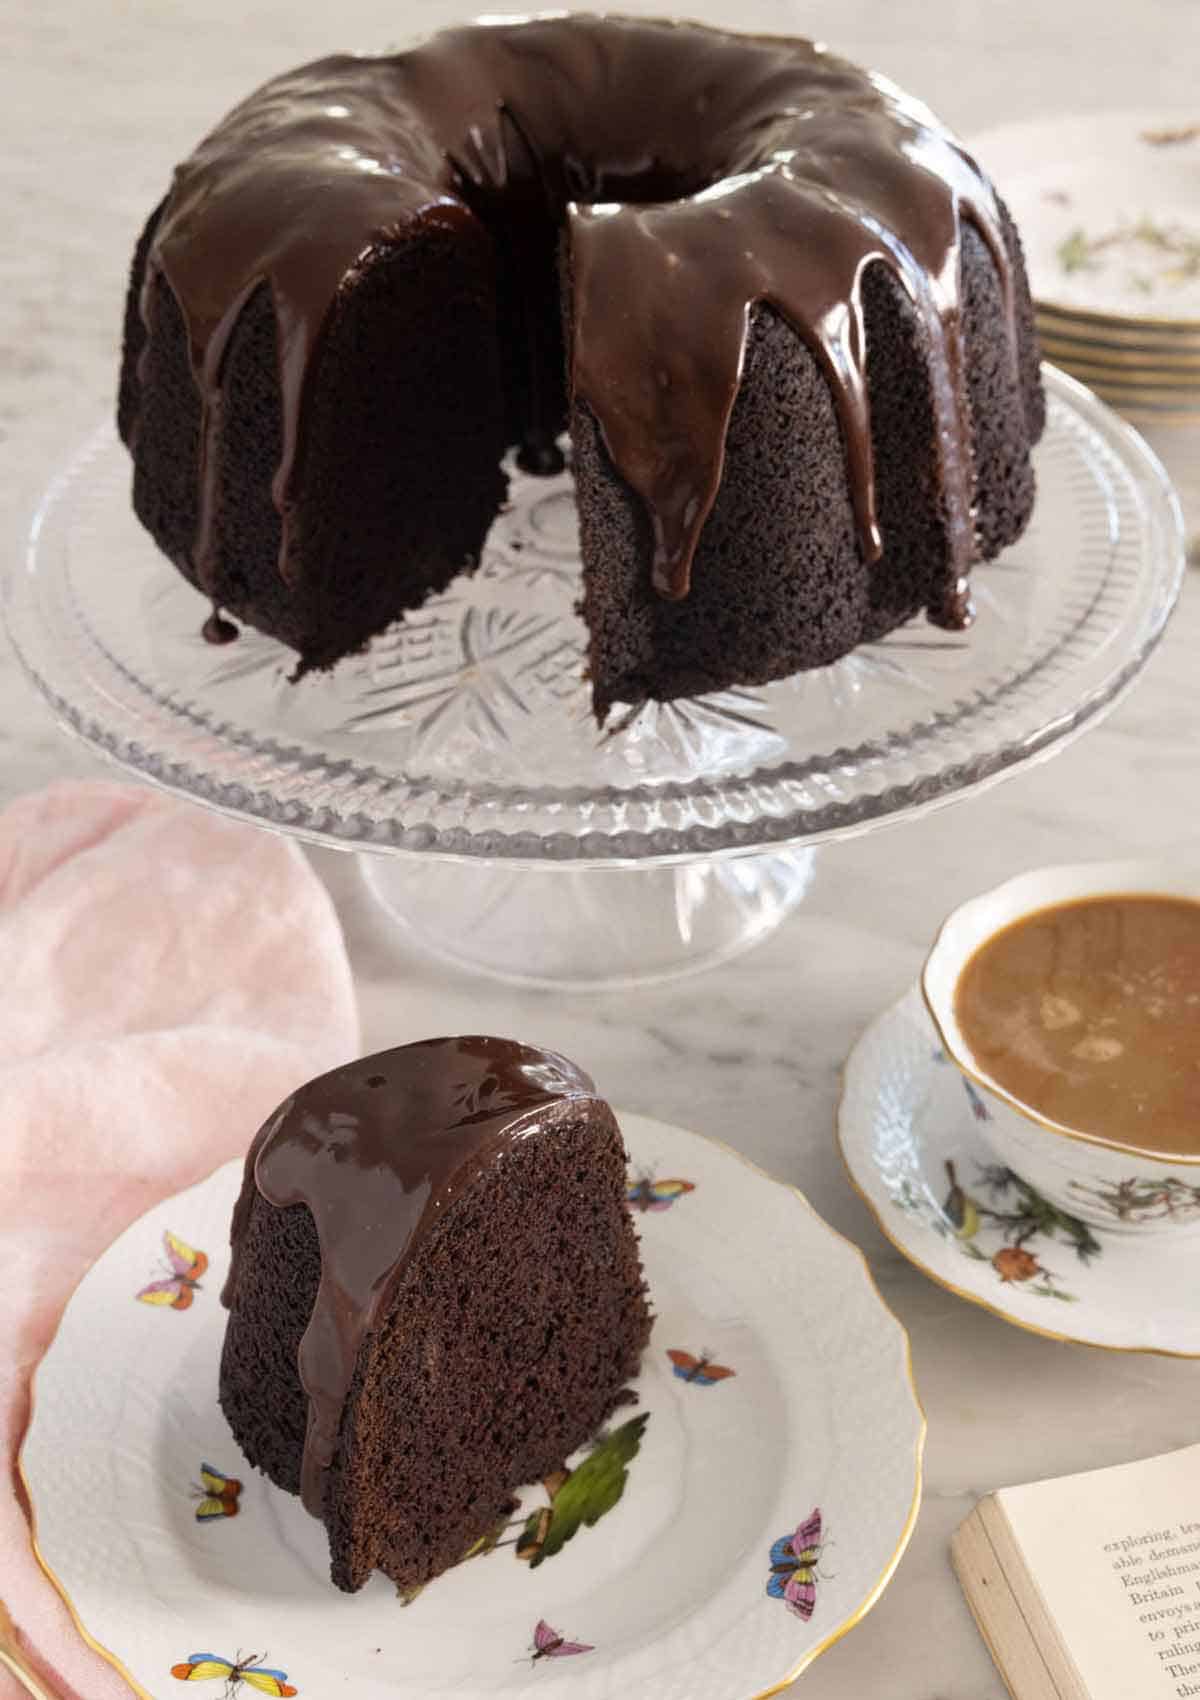 A cake stand with a chocolate bundt cake with a slice cut out in front.